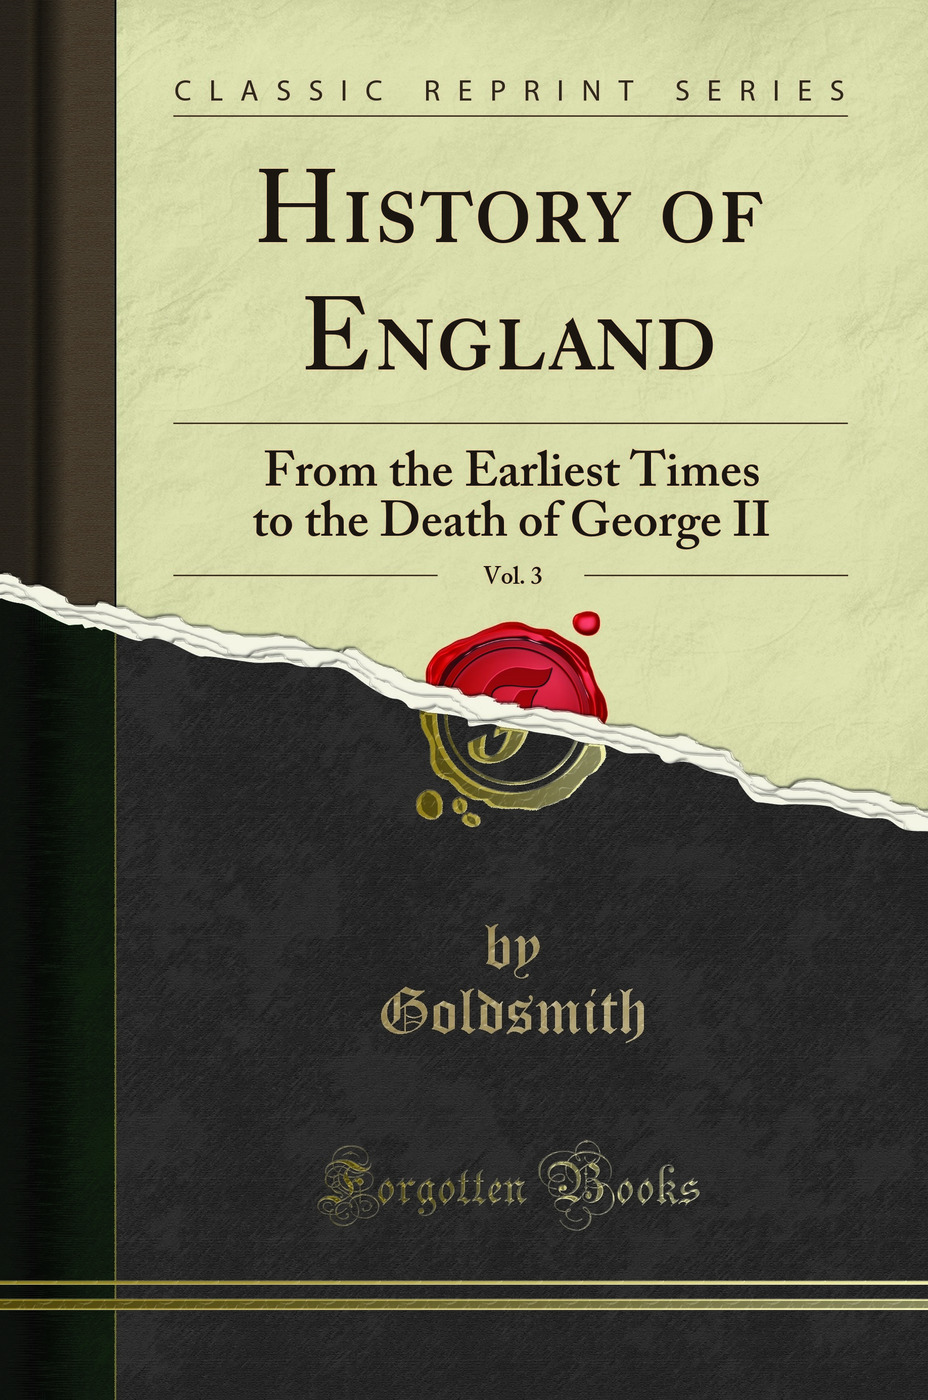 History of England, Vol. 3: From the Earliest Times to the Death of George II - Goldsmith